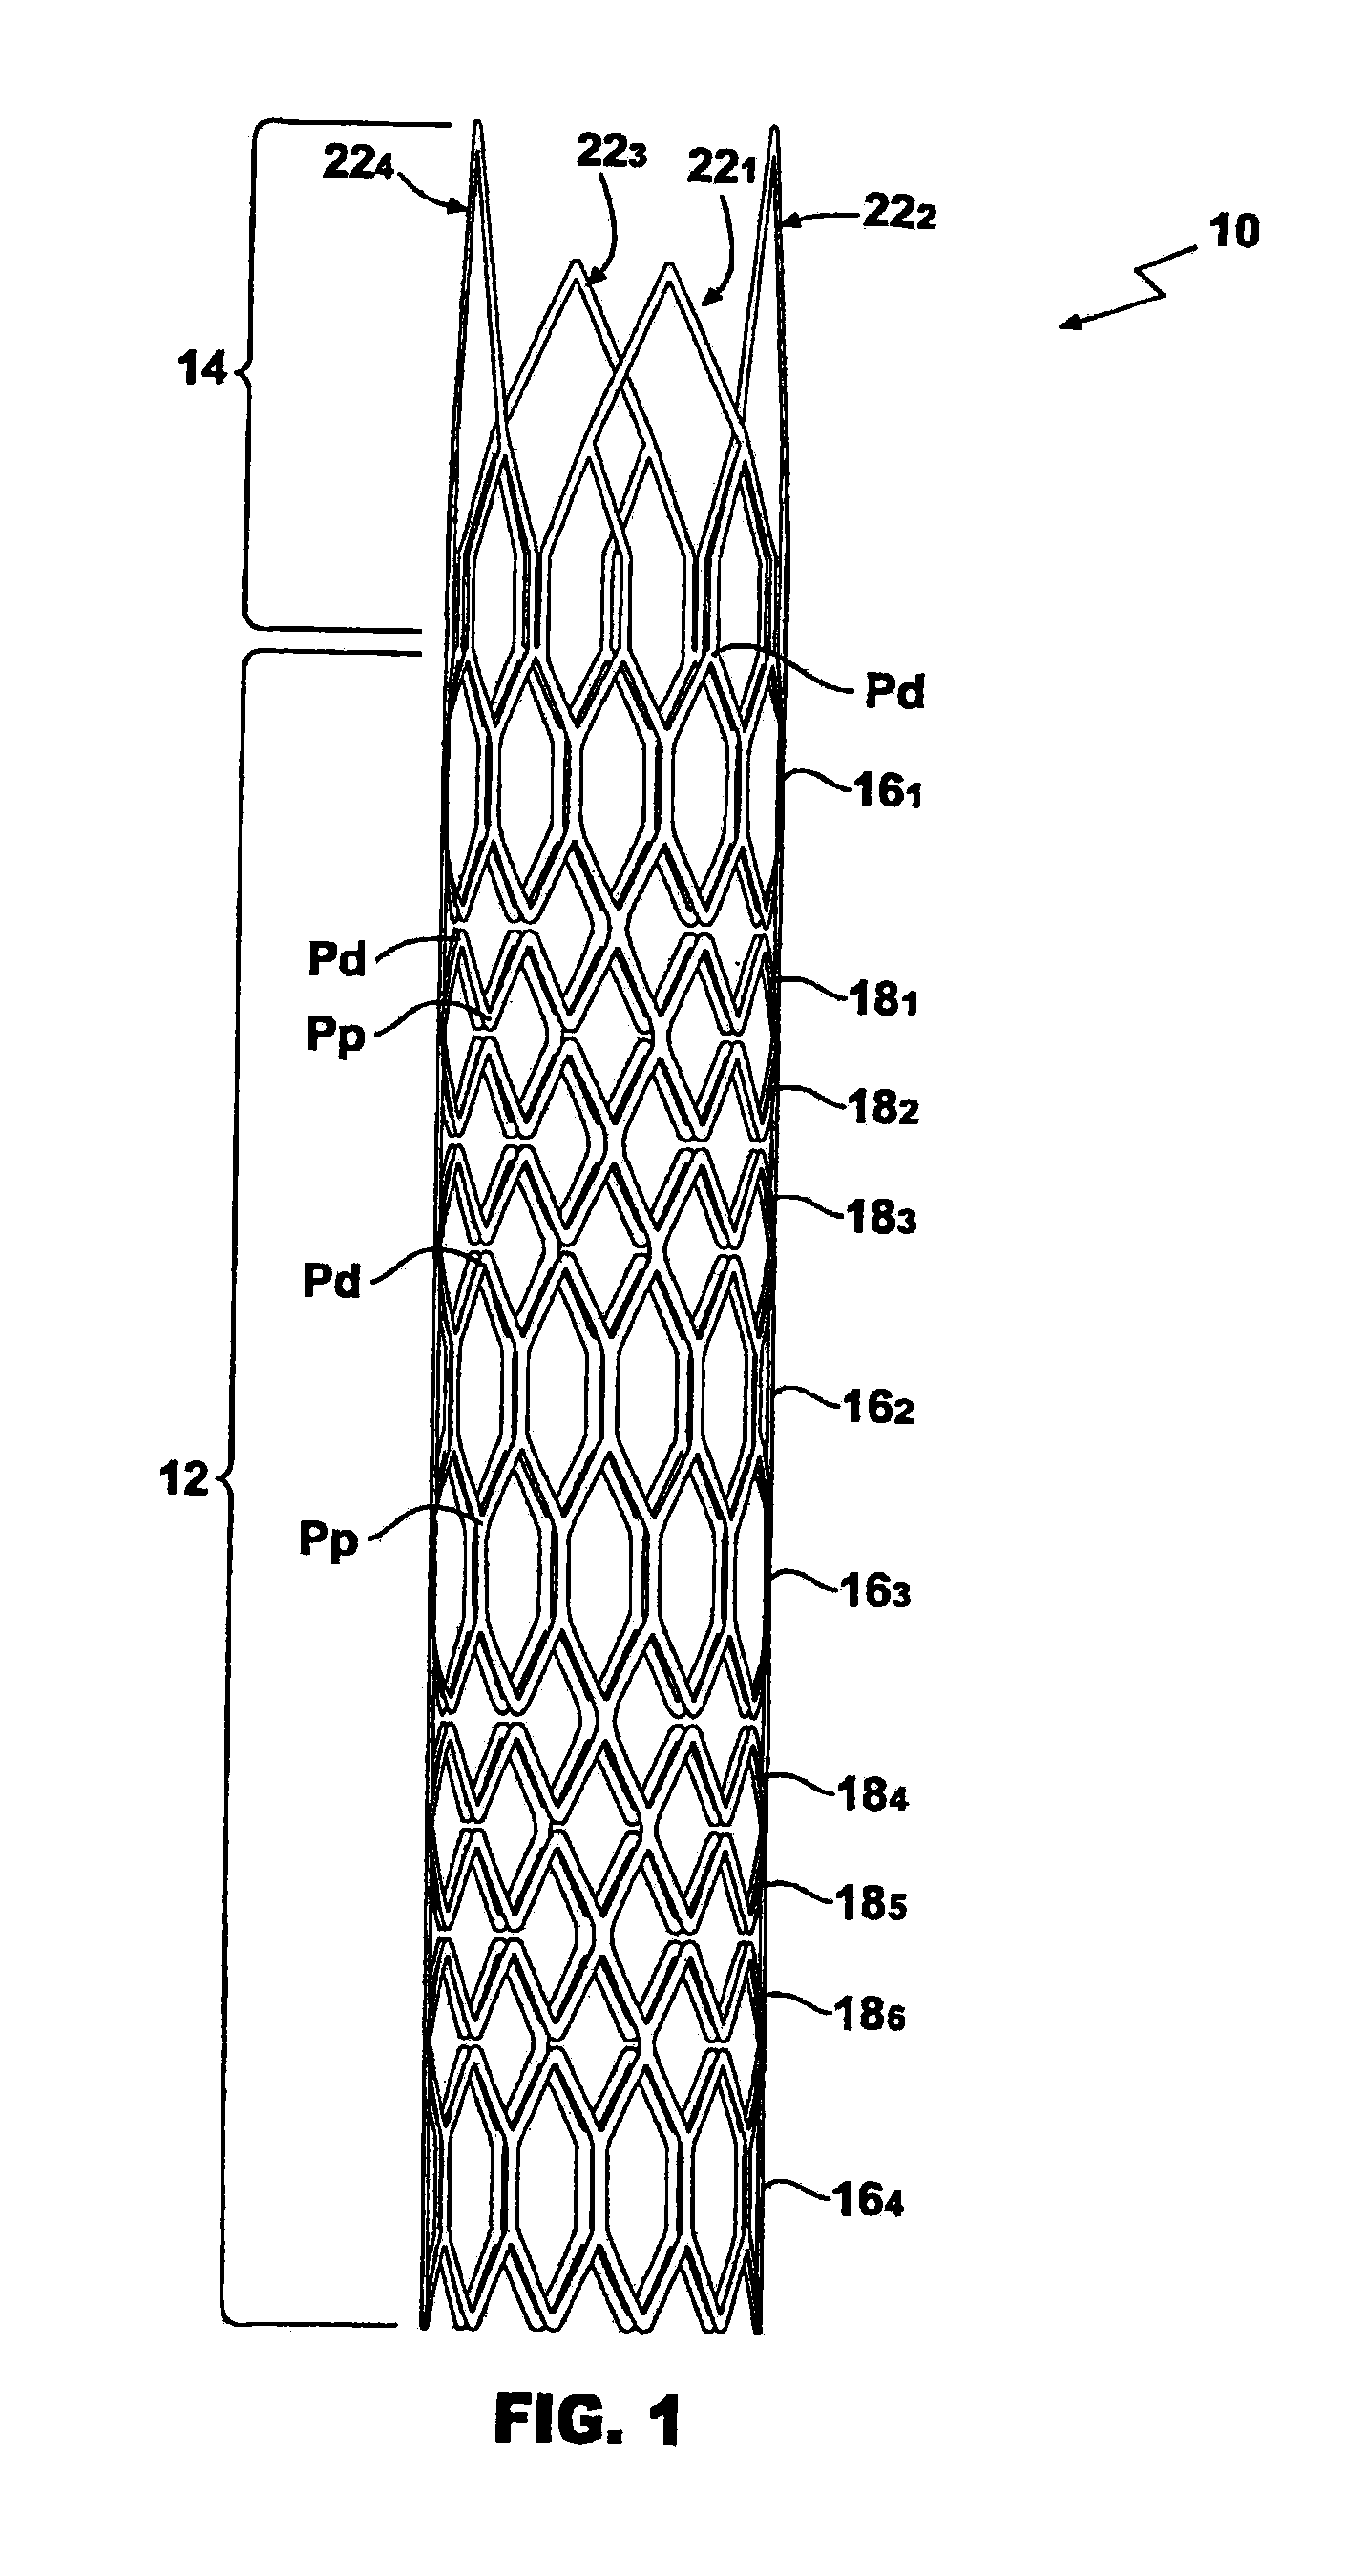 Temporary, Repositionable Or Retrievable Intraluminal Devices